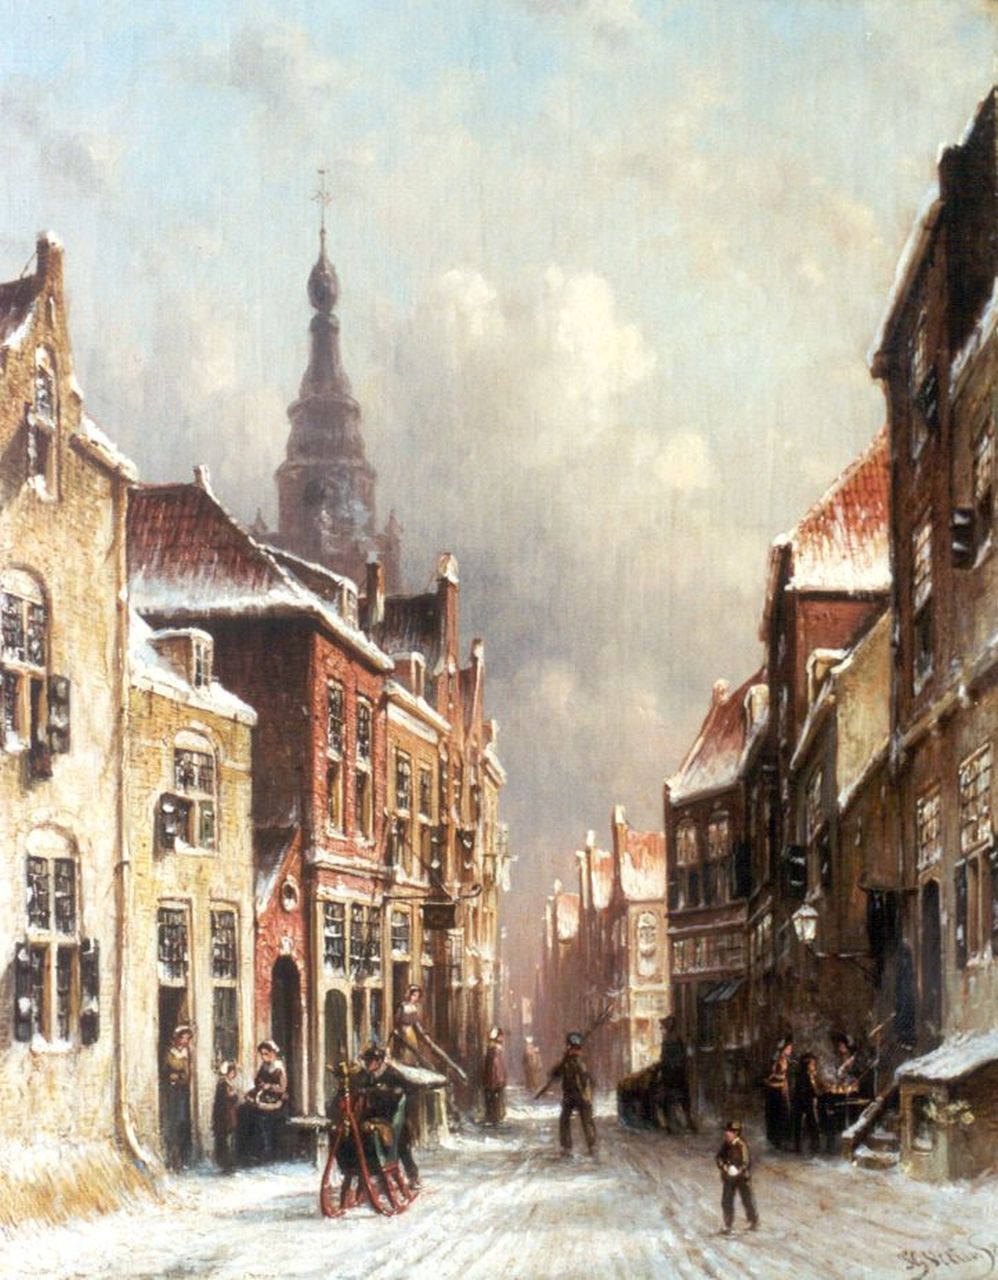 Vertin P.G.  | Petrus Gerardus Vertin, A snow-covered town, oil on canvas 45.0 x 36.2 cm, signed l.r. and dated '83